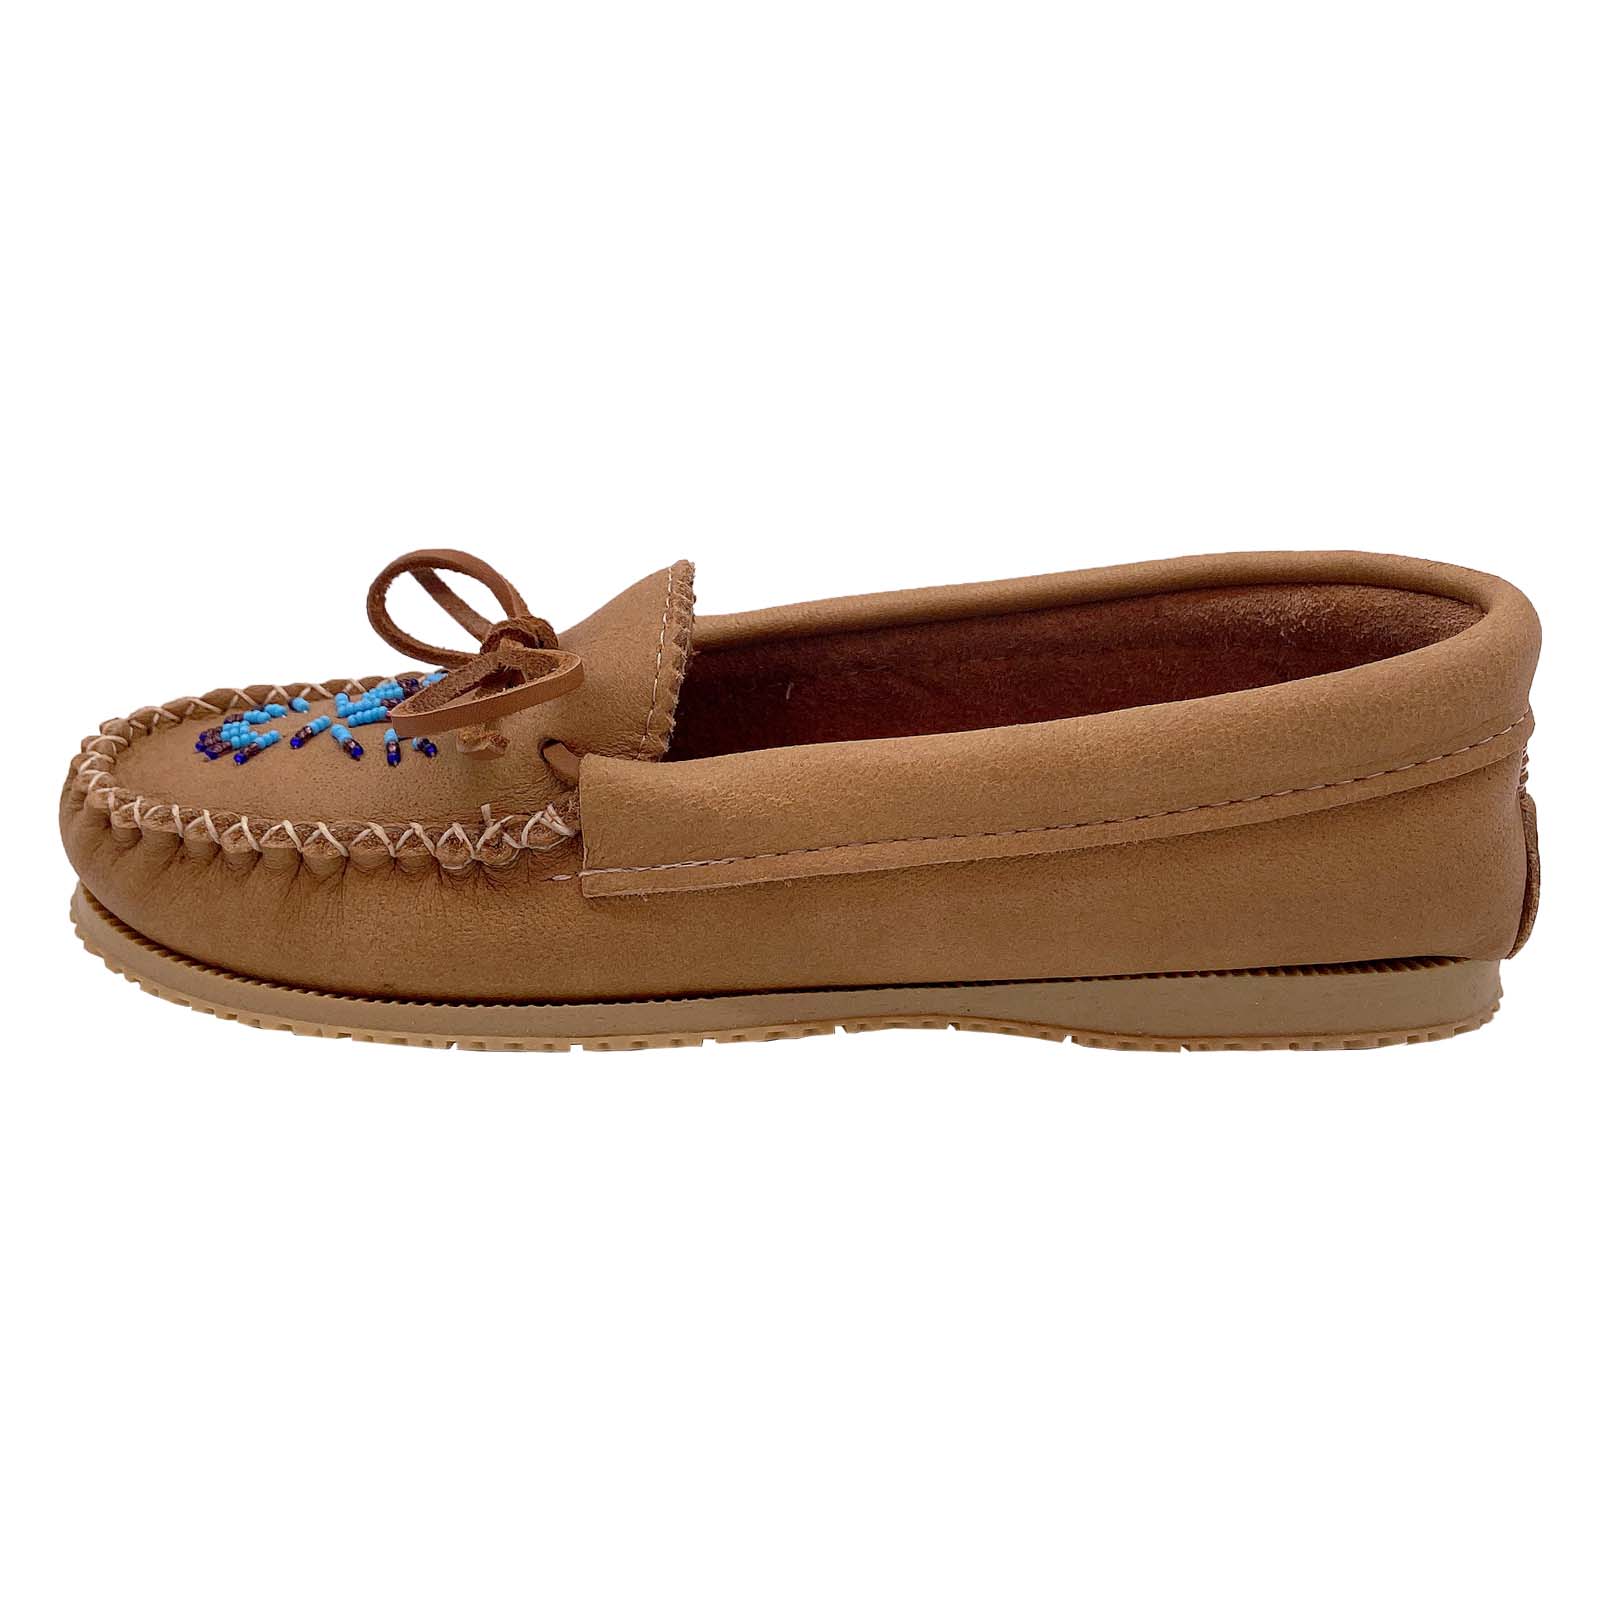 Women's Genuine Moosehide Leather Beaded Moccasin Shoes – Leather-Moccasins